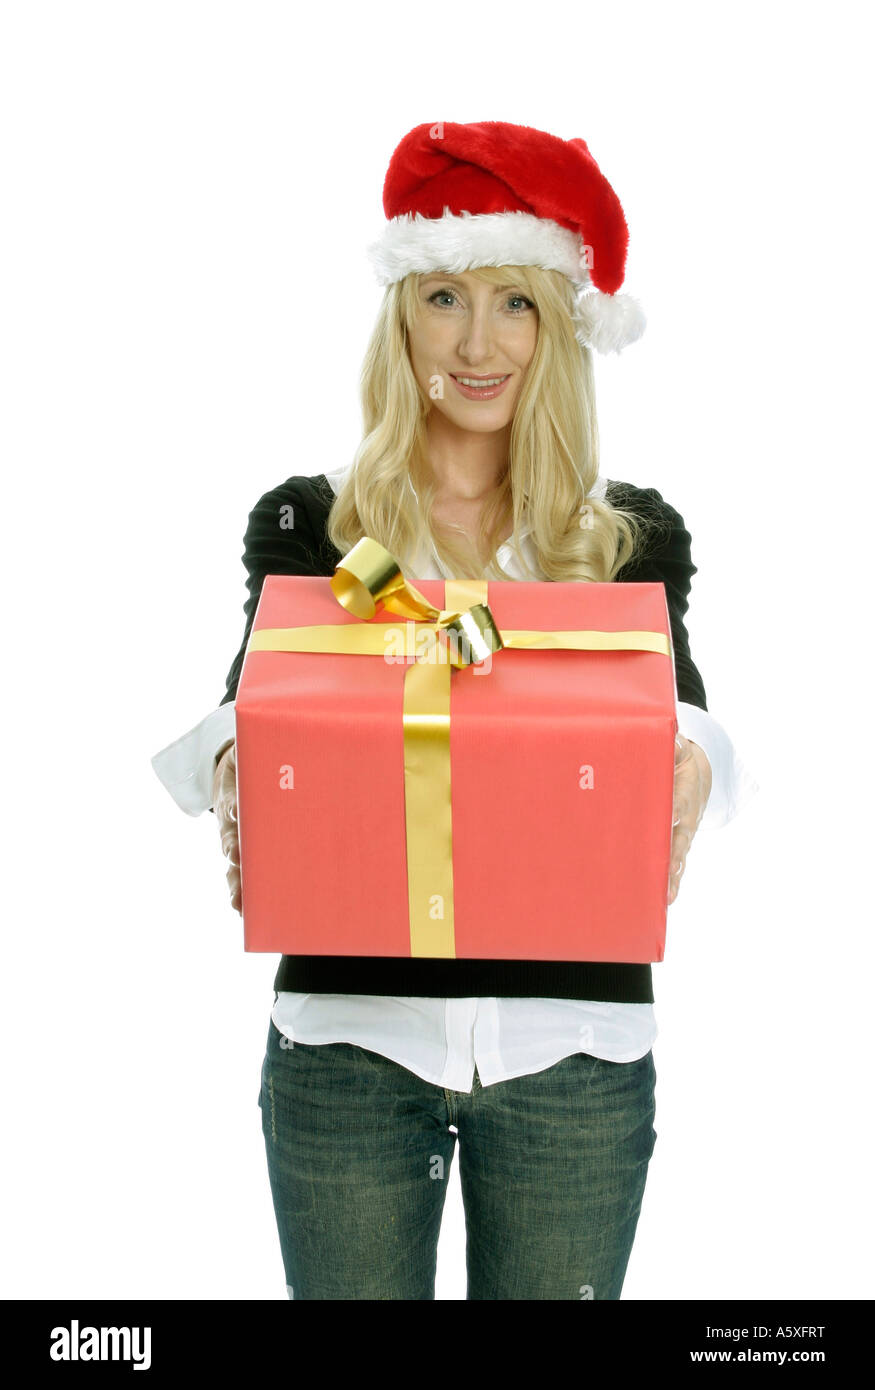 Mid adult woman wearing Santa hat and holding Christmas gift portrait Stock Photo